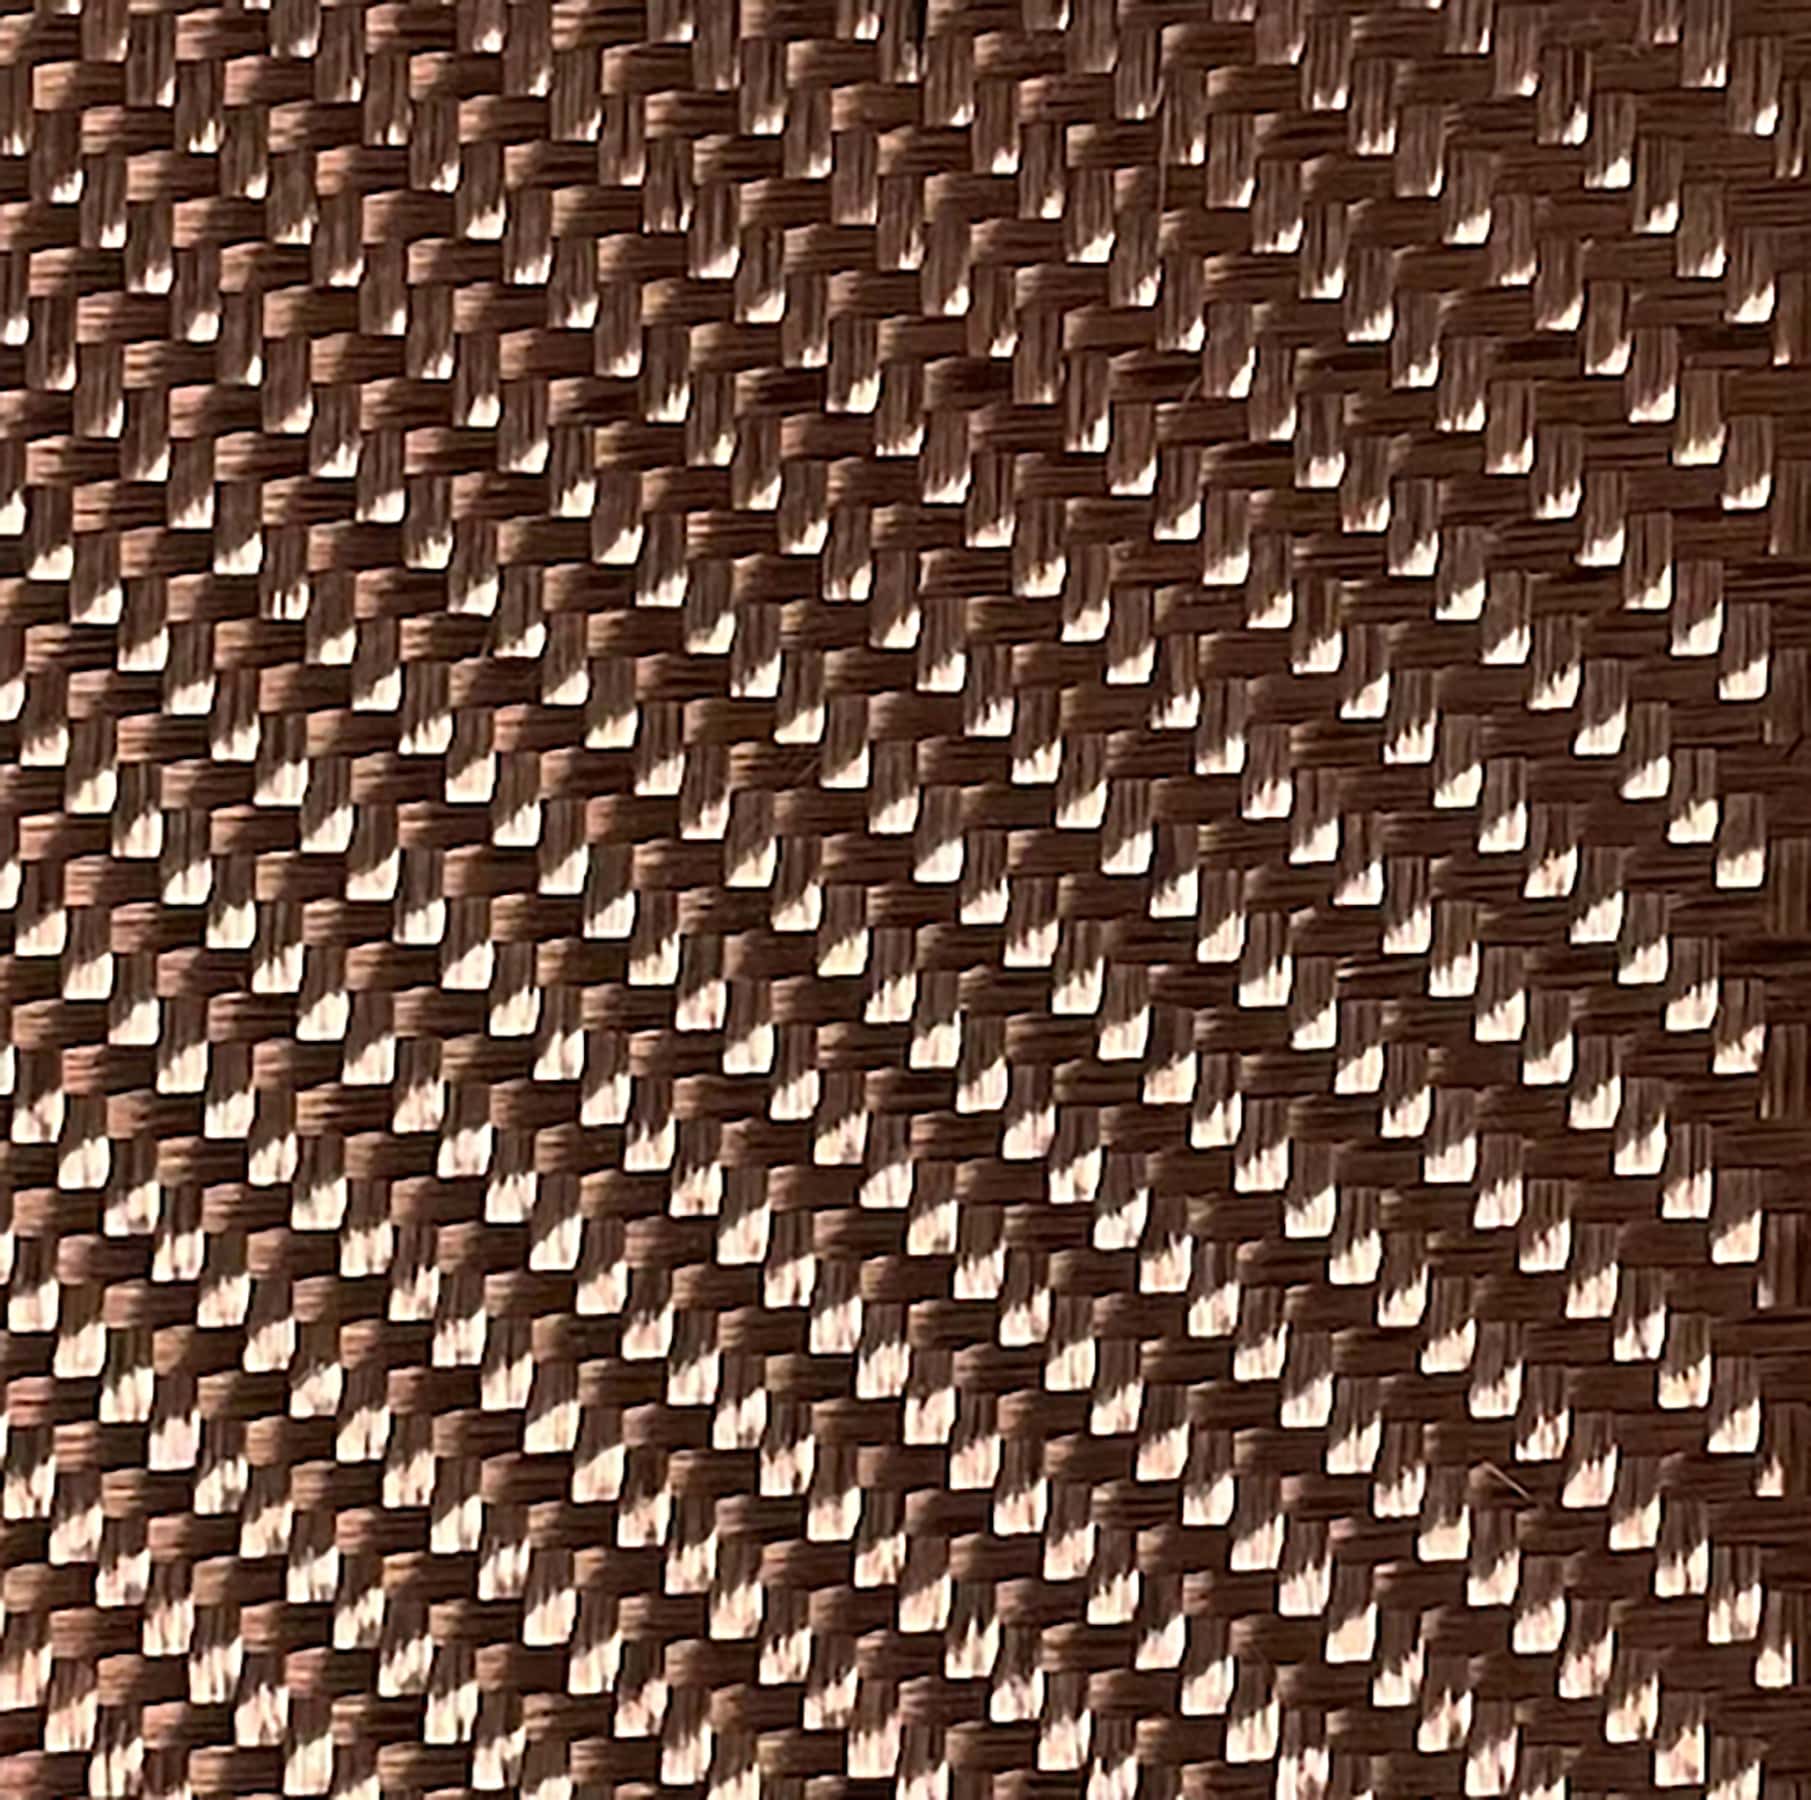 Metallic Copper Tissue Paper (1 sided)